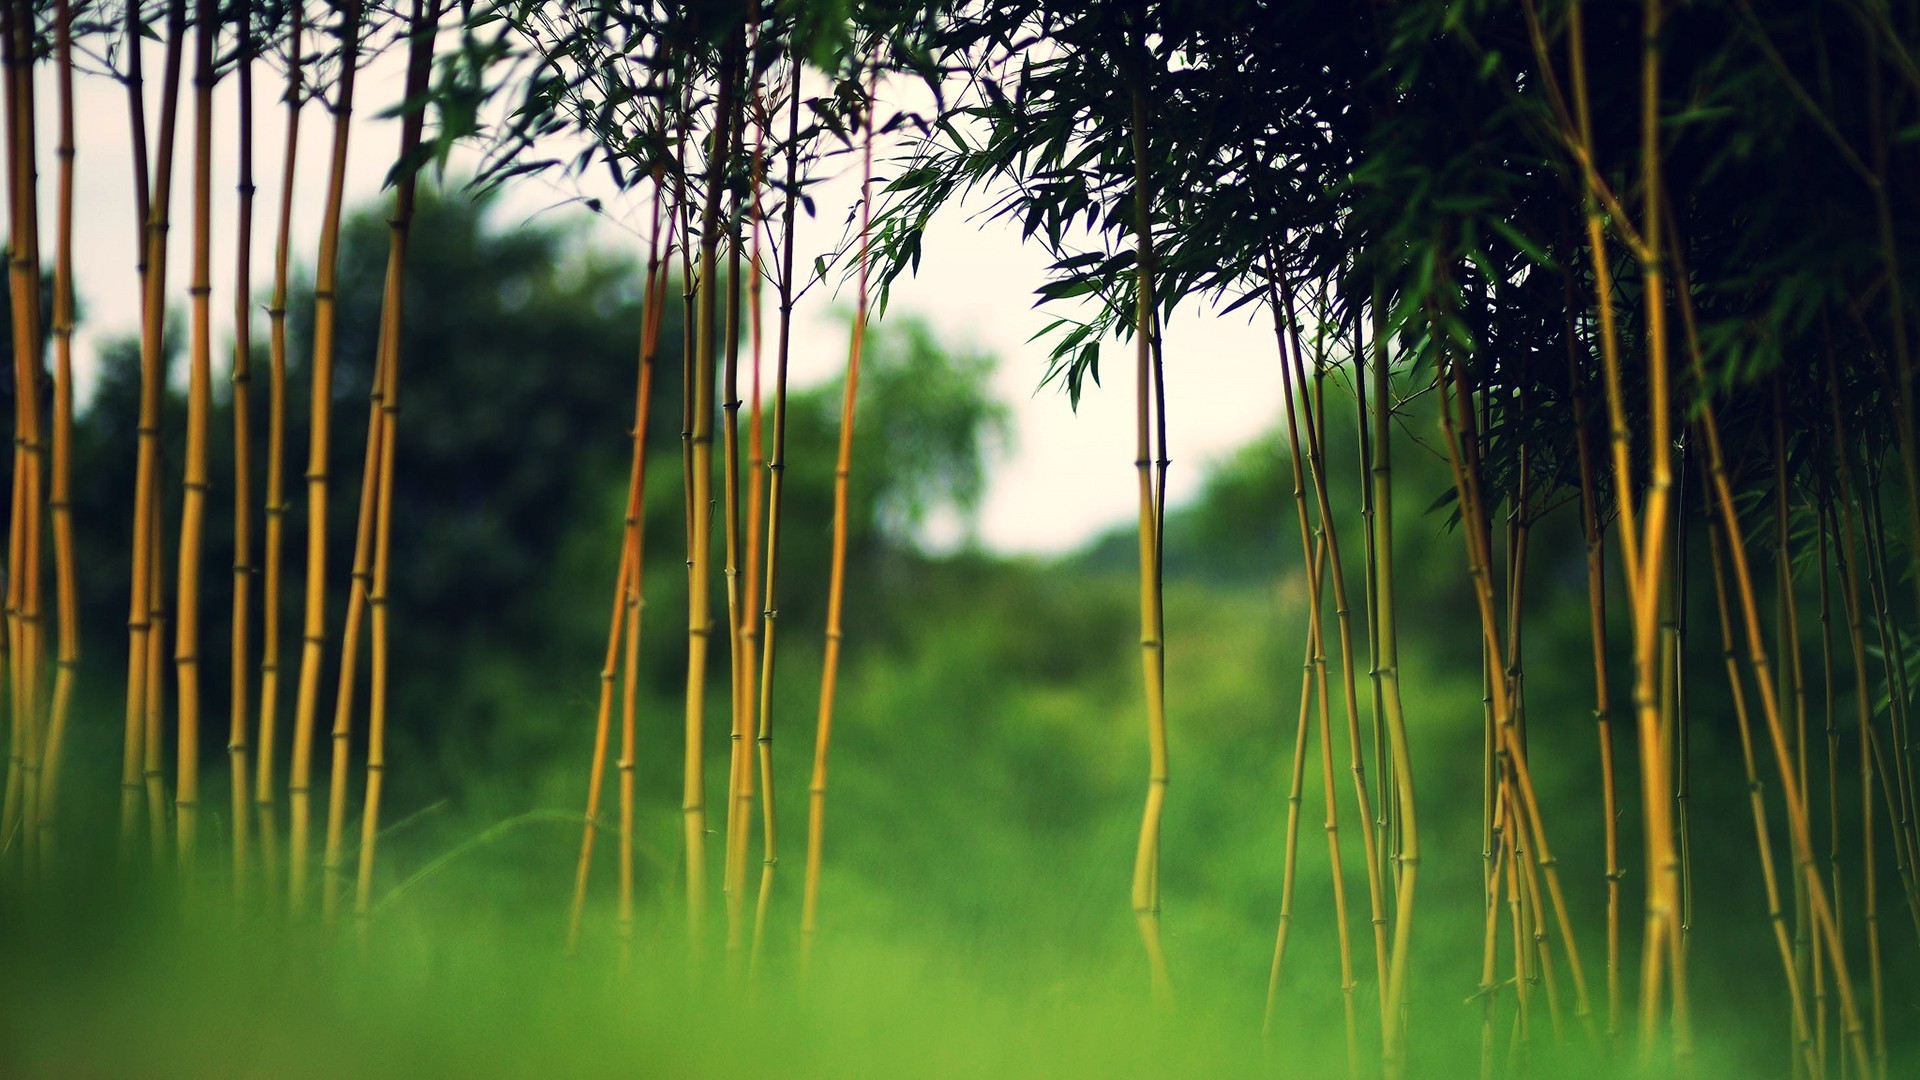 1920x1080 HD Bamboo Tree Nature Top Hd Wallpaper For Desktop Background Free